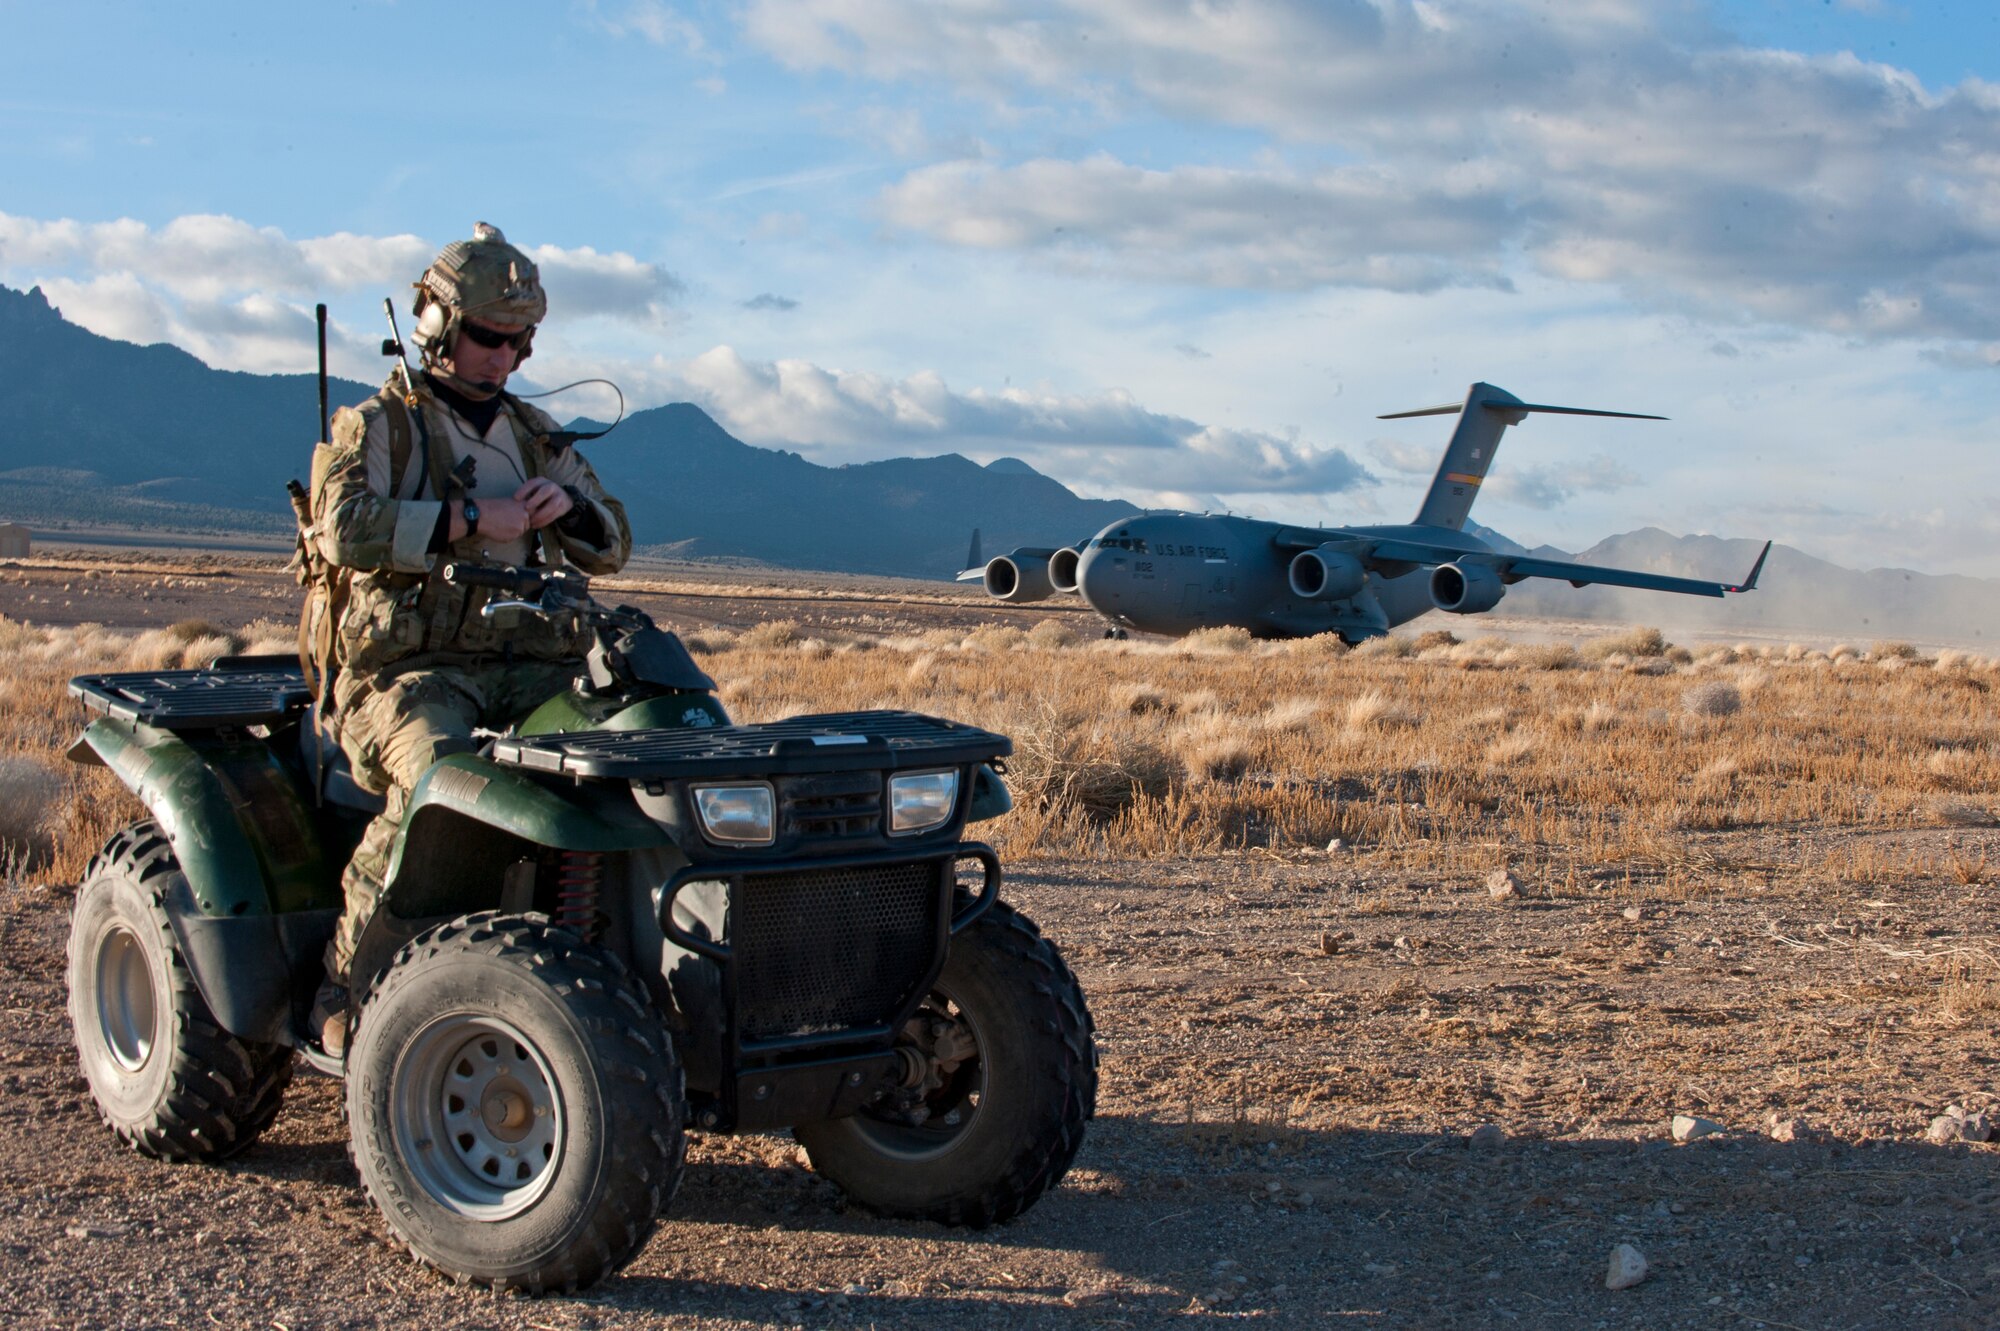 A Joint Terminal Attack Controller prepares to guide paratroopers to a rally point after a C-17 Globemaster III lands an unimproved landing strip during the U.S. Air Force Weapons School's Joint Forcible Entry Exercise 14B on the Nevada Test and Training Range Dec. 6, 2014. The JFEX, as part of a restructured integration phase in the USAFWS, is a prime example of the advanced training these students receive throughout this course that is unmatched anywhere else in the world. (U.S. Air Force photo by Staff Sgt. Victoria Sneed)